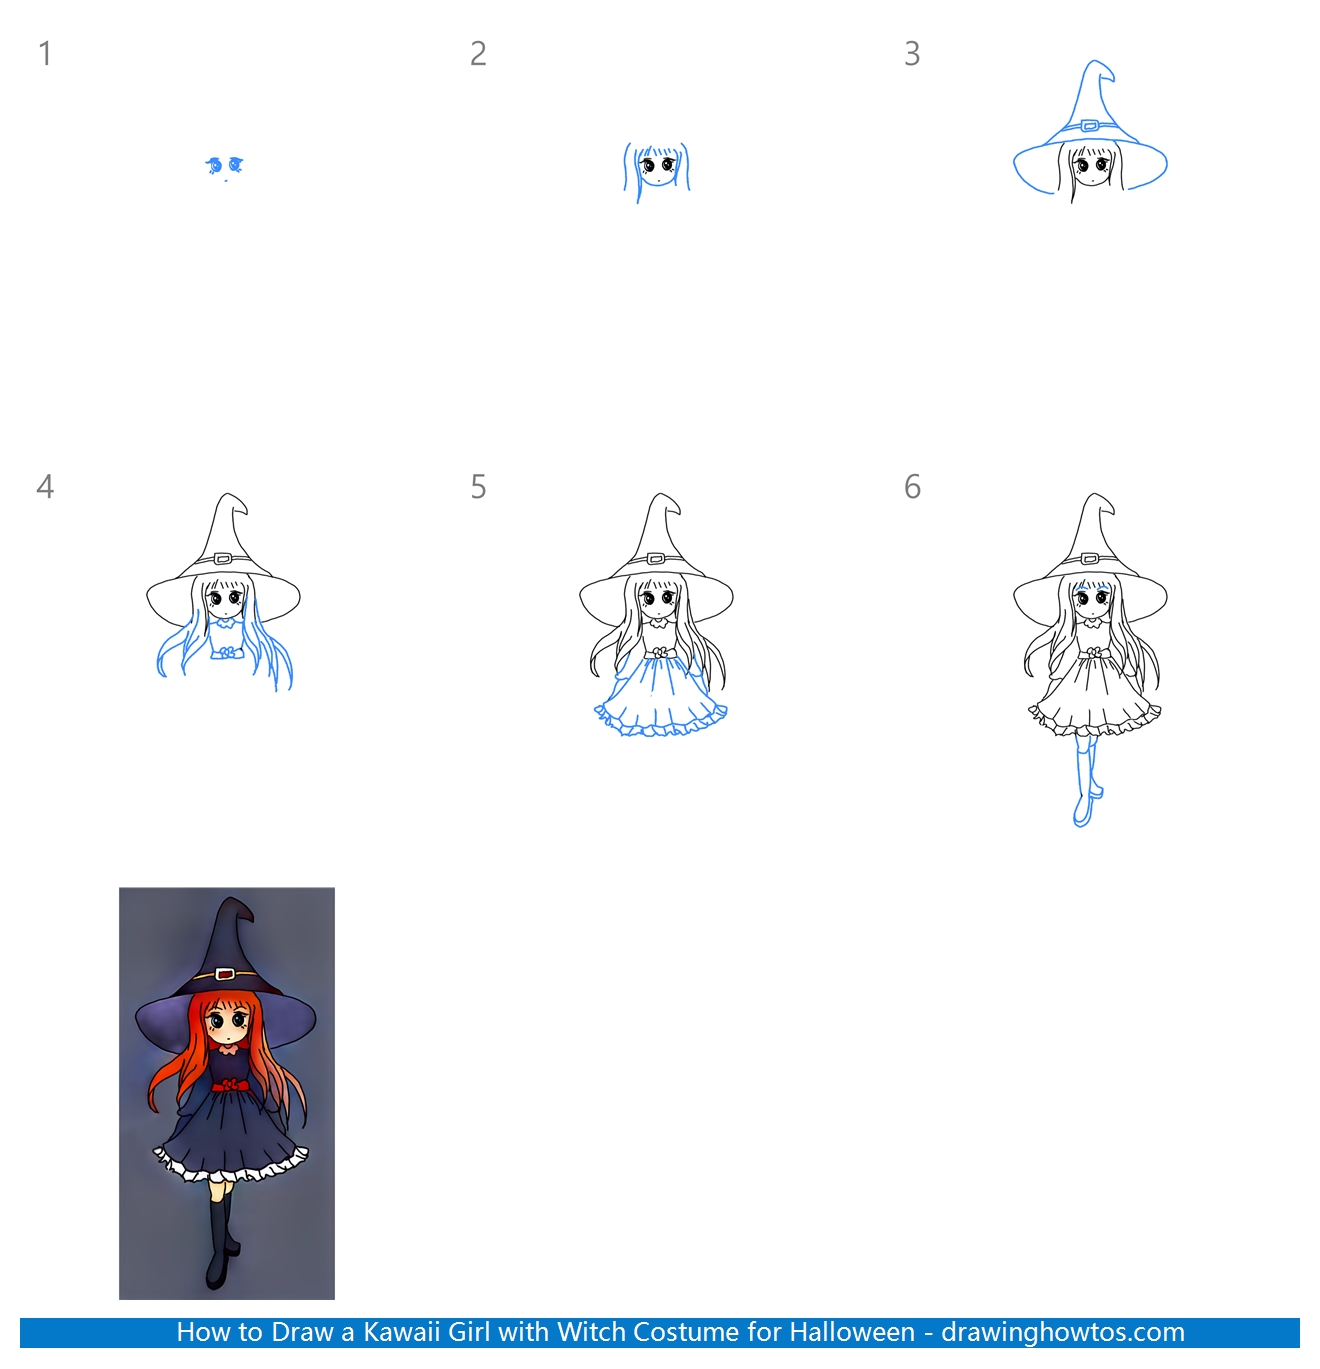 How to Draw a Kawaii Girl with Witch Costume for Halloween Step by Step